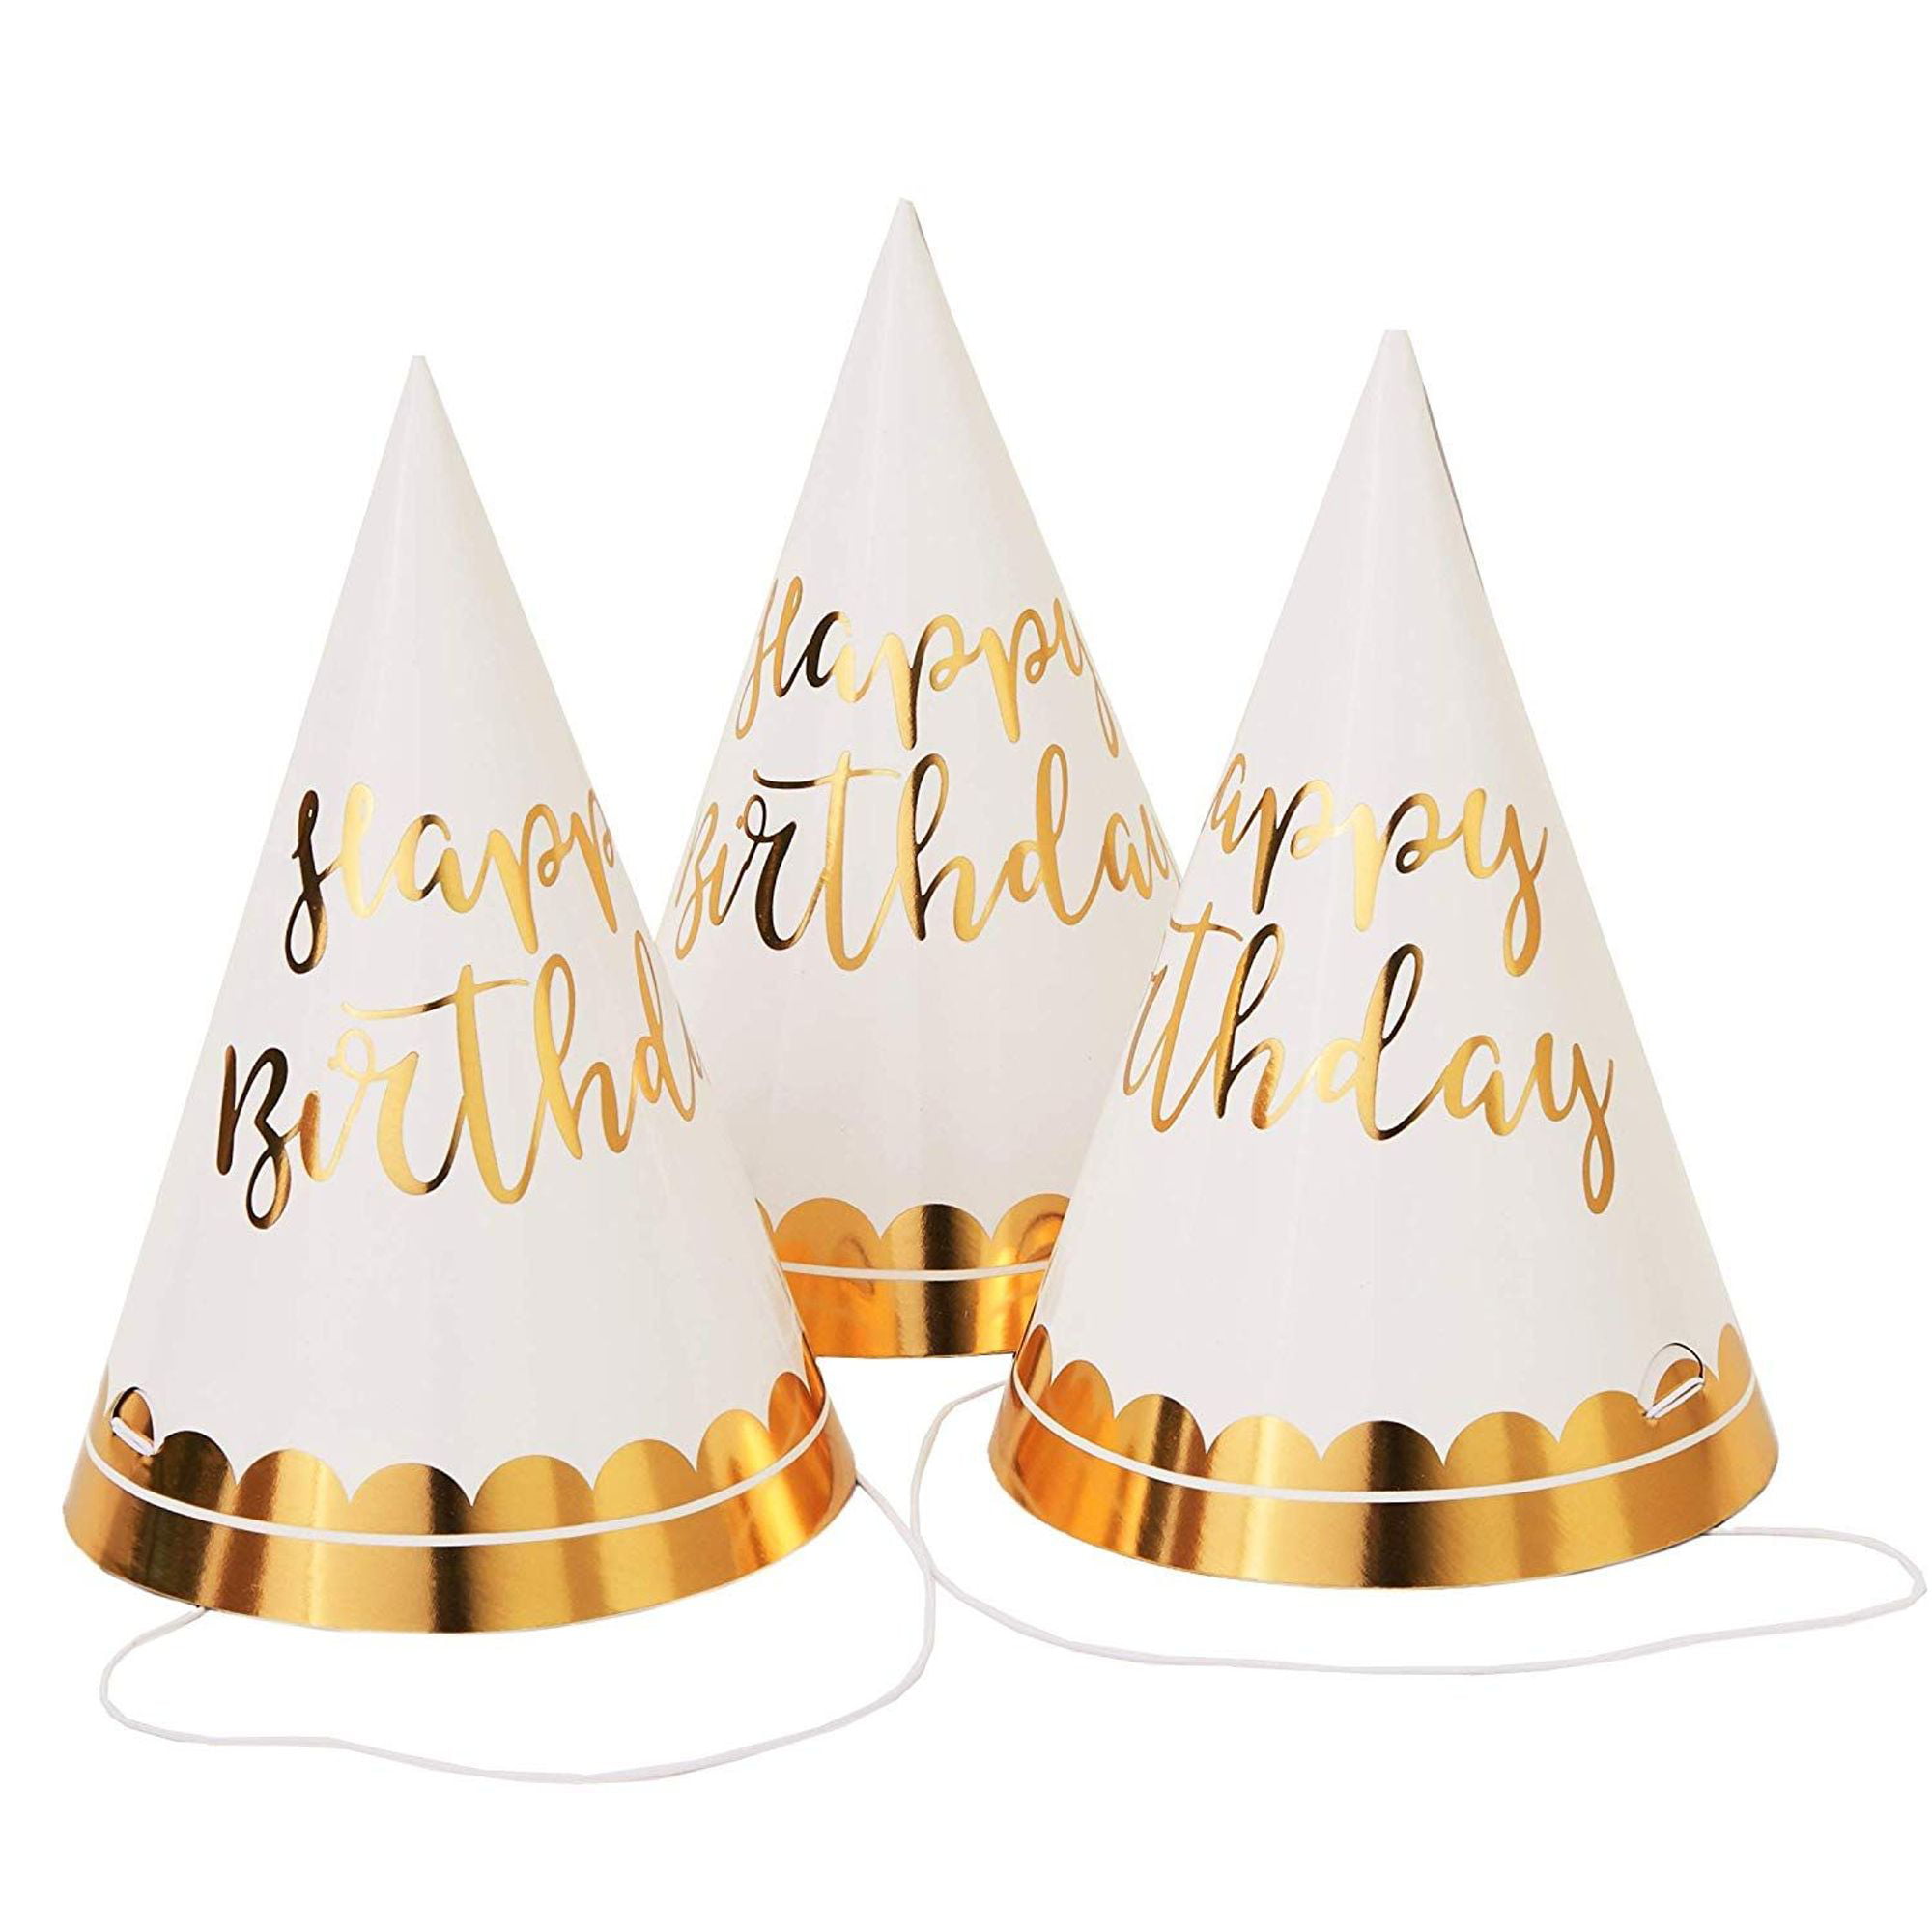 12-pack-gold-foil-happy-birthday-party-cone-hats-for-adults-and-kids-4